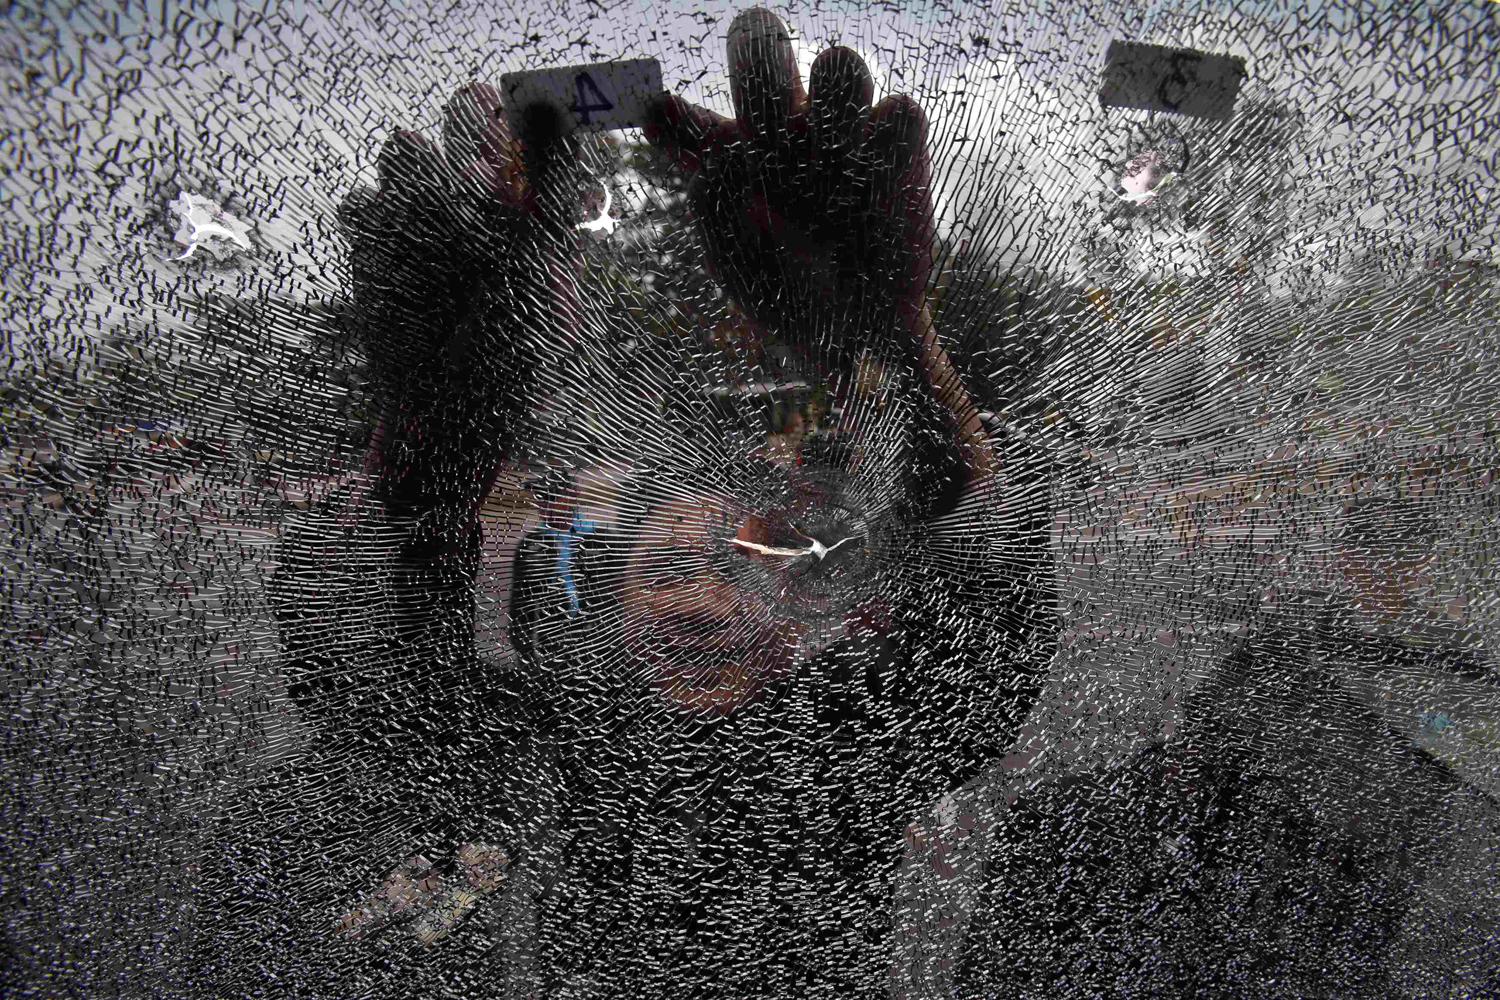 Police officer inspects the damaged windshield of a police bus after clashes between police and rubber farmers in Bangsaphan